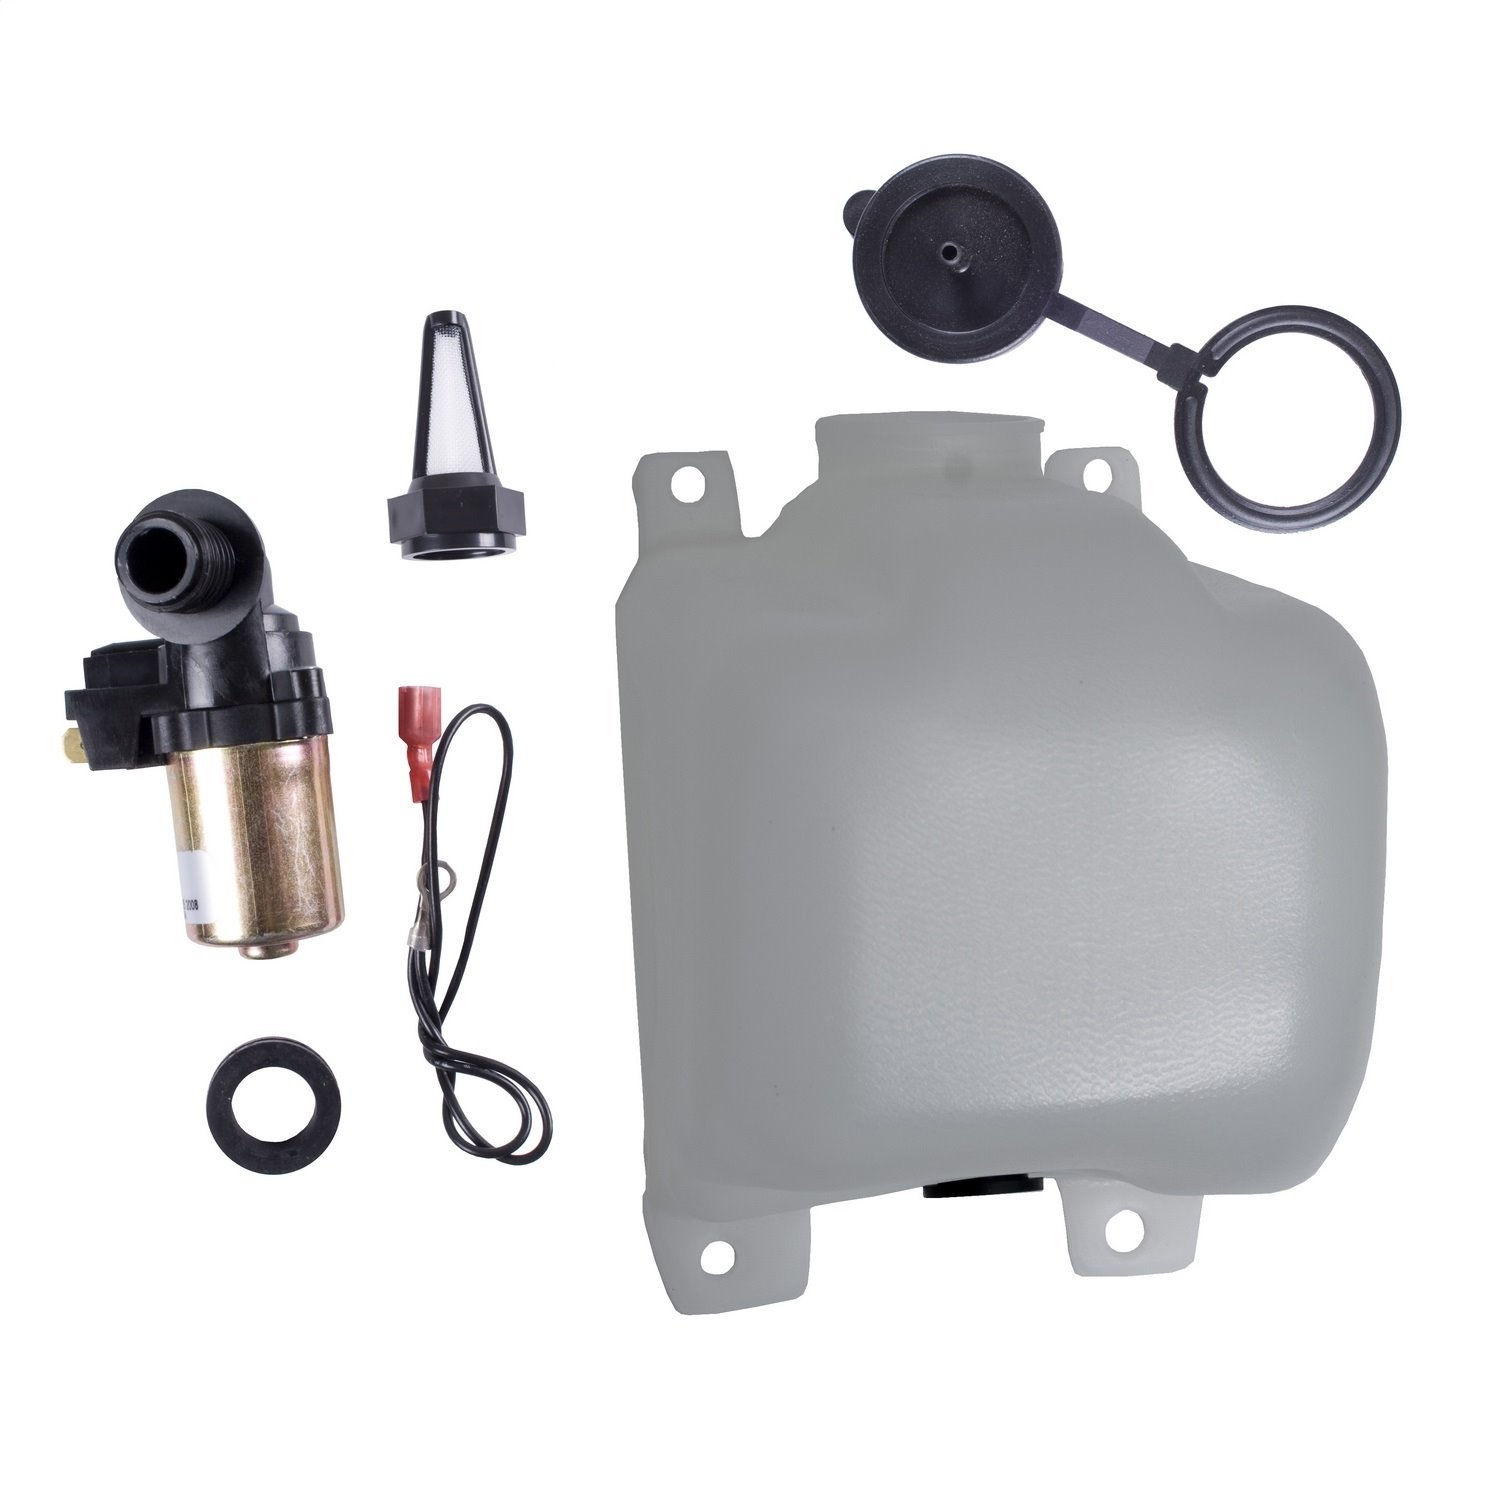 This OEM washer bottle kit from Omix-ADA includes